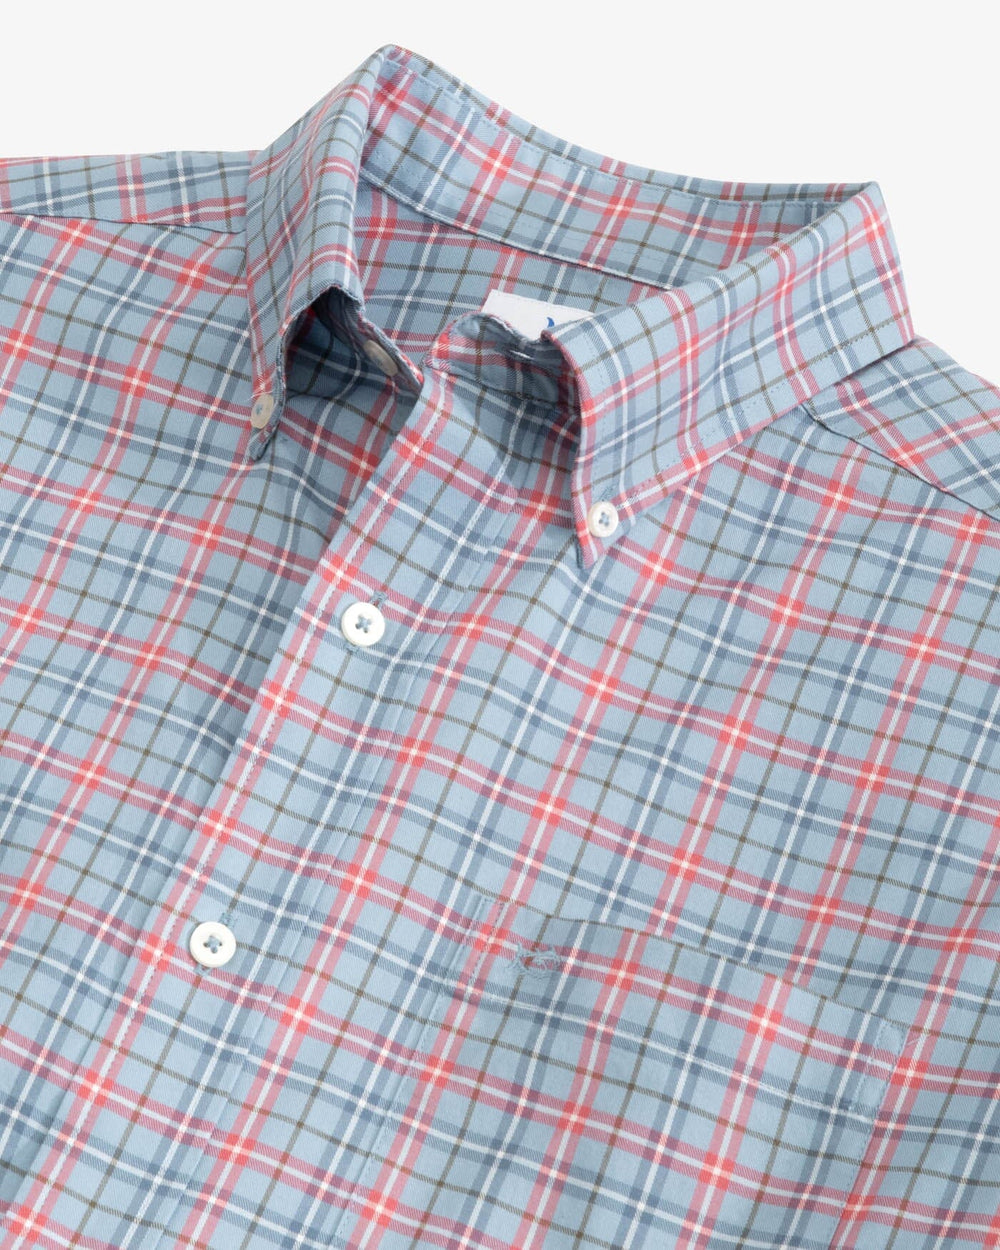 The detail view of the Southern Tide Skipjack Woodward Plaid Sport Shirt by Southern Tide - Mountain Spring Blue